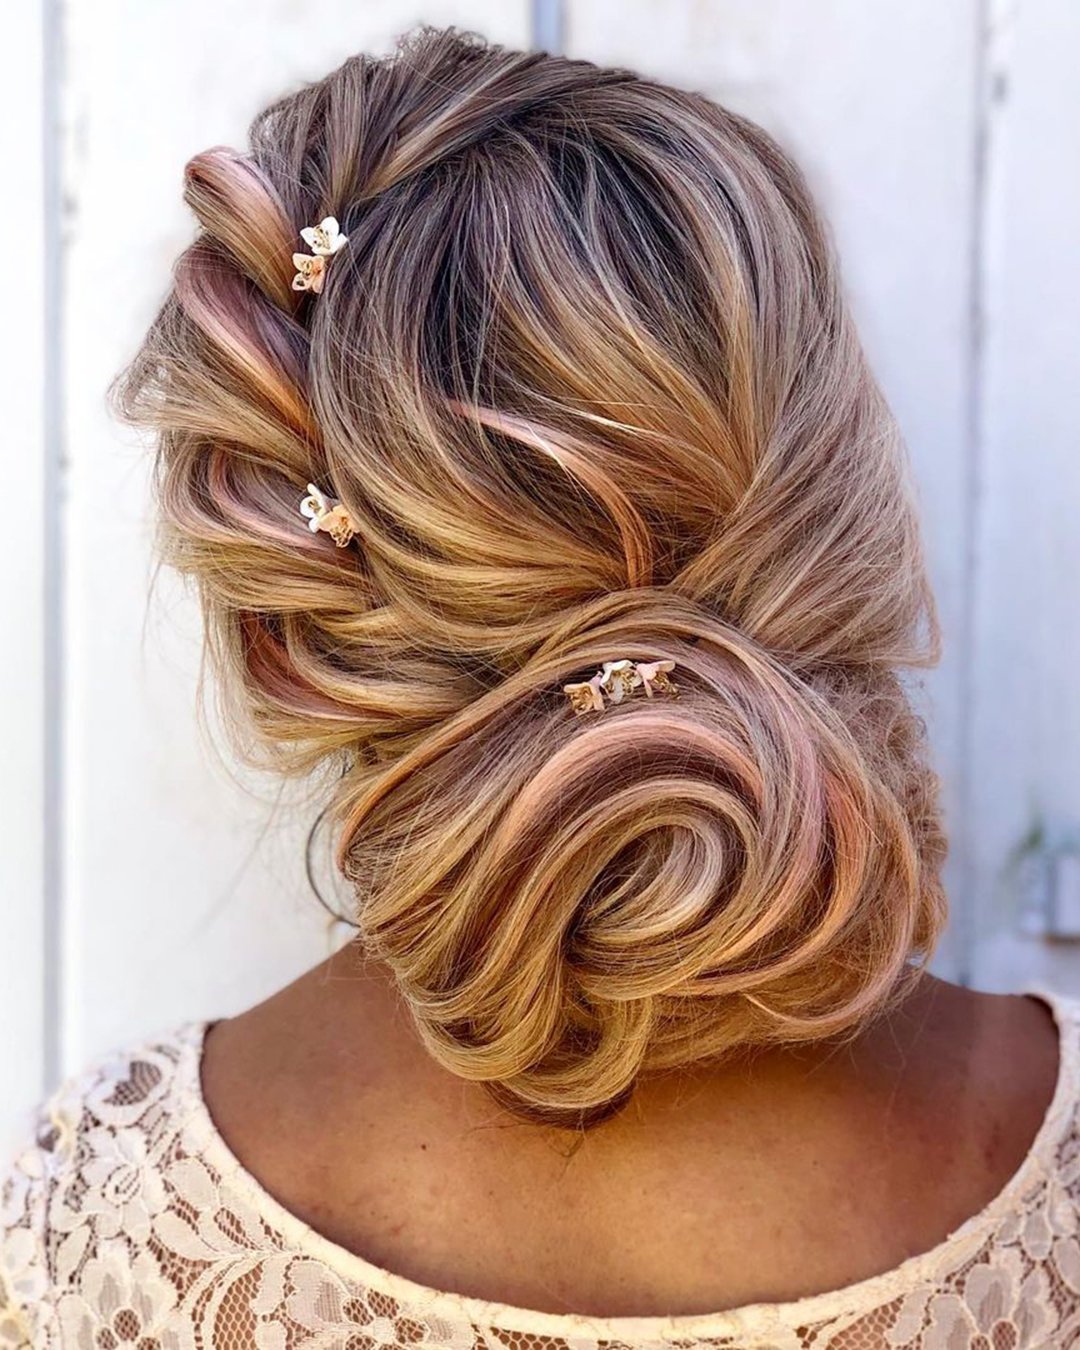 wedding updos for long hair creative low bun with small pins alexandralee1016